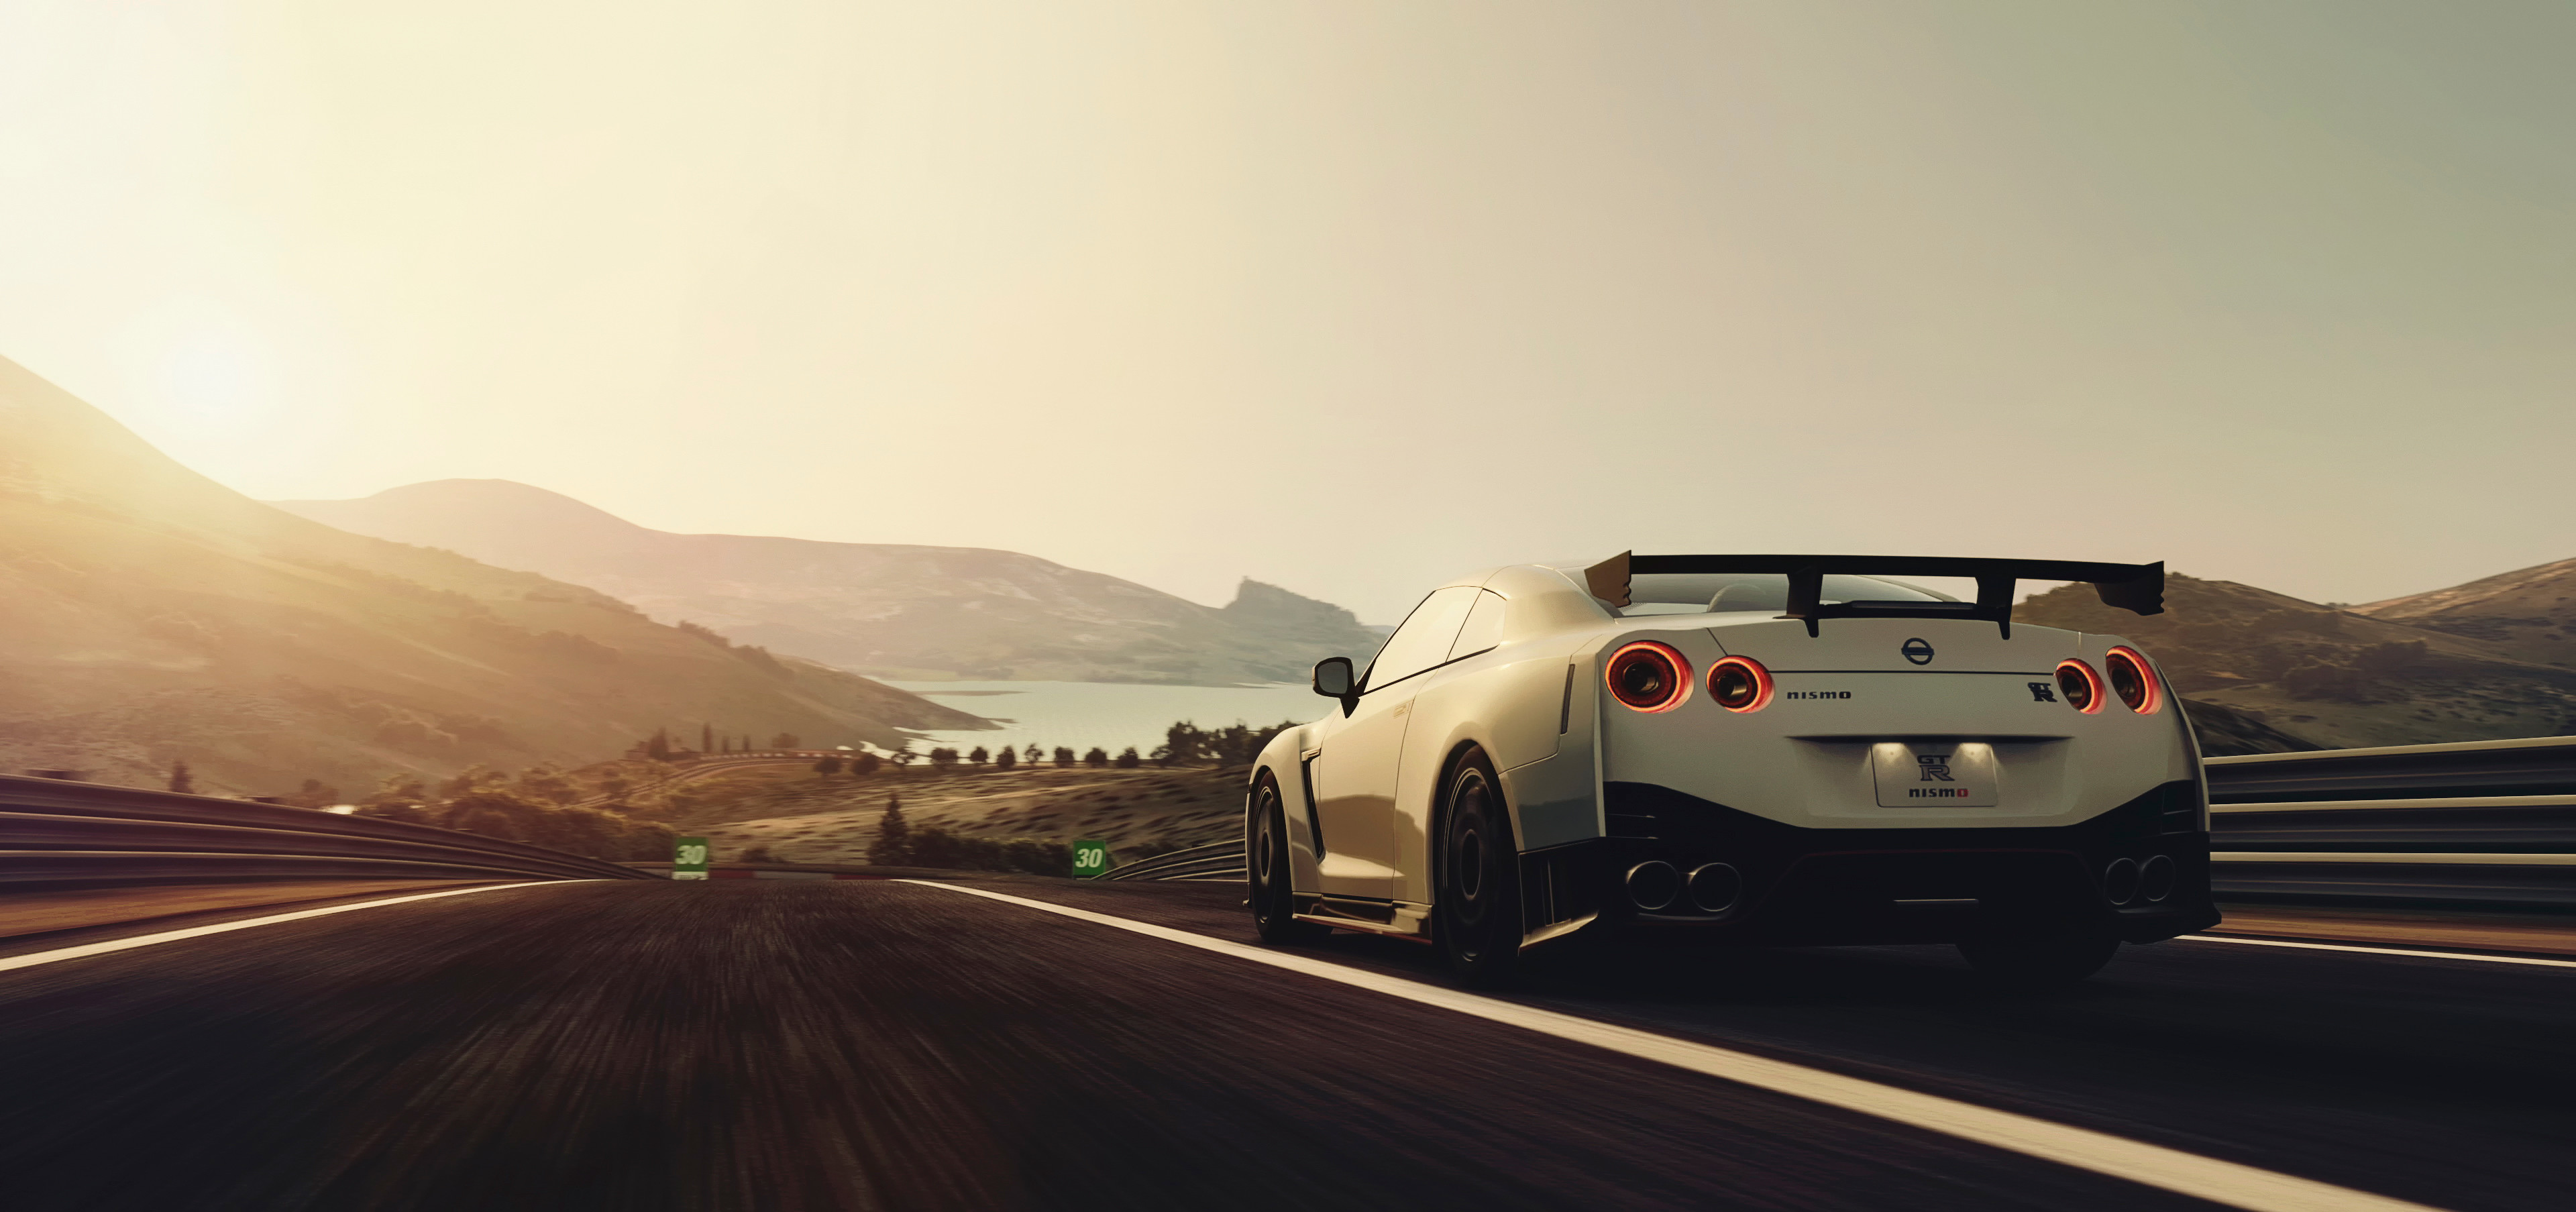 3840x1807 Nissan GT-R Nismo HD Wallpaper | Background Image |  | ID:547129 -  Wallpaper Abyss